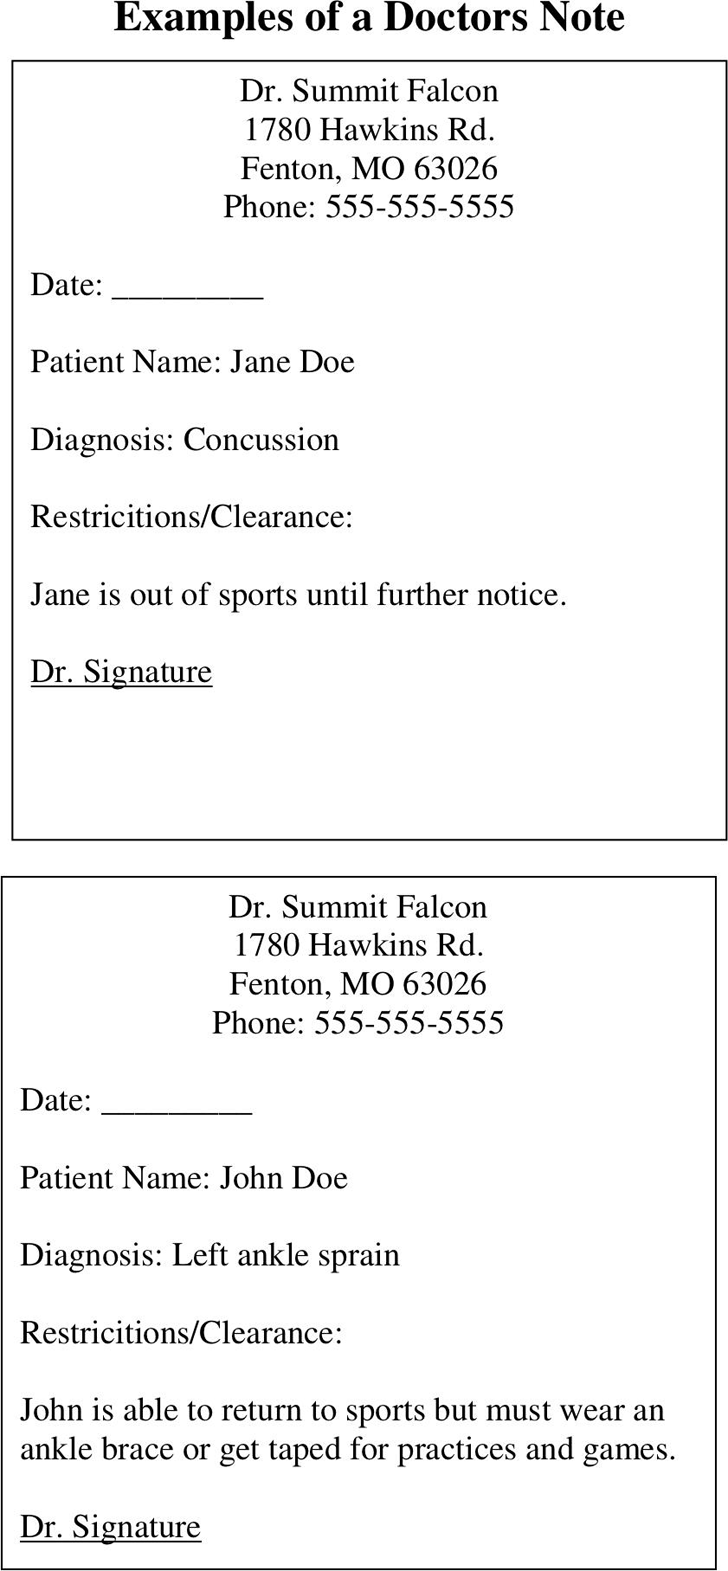 Free Doctors Note Template PDF 11KB 1 Page s 